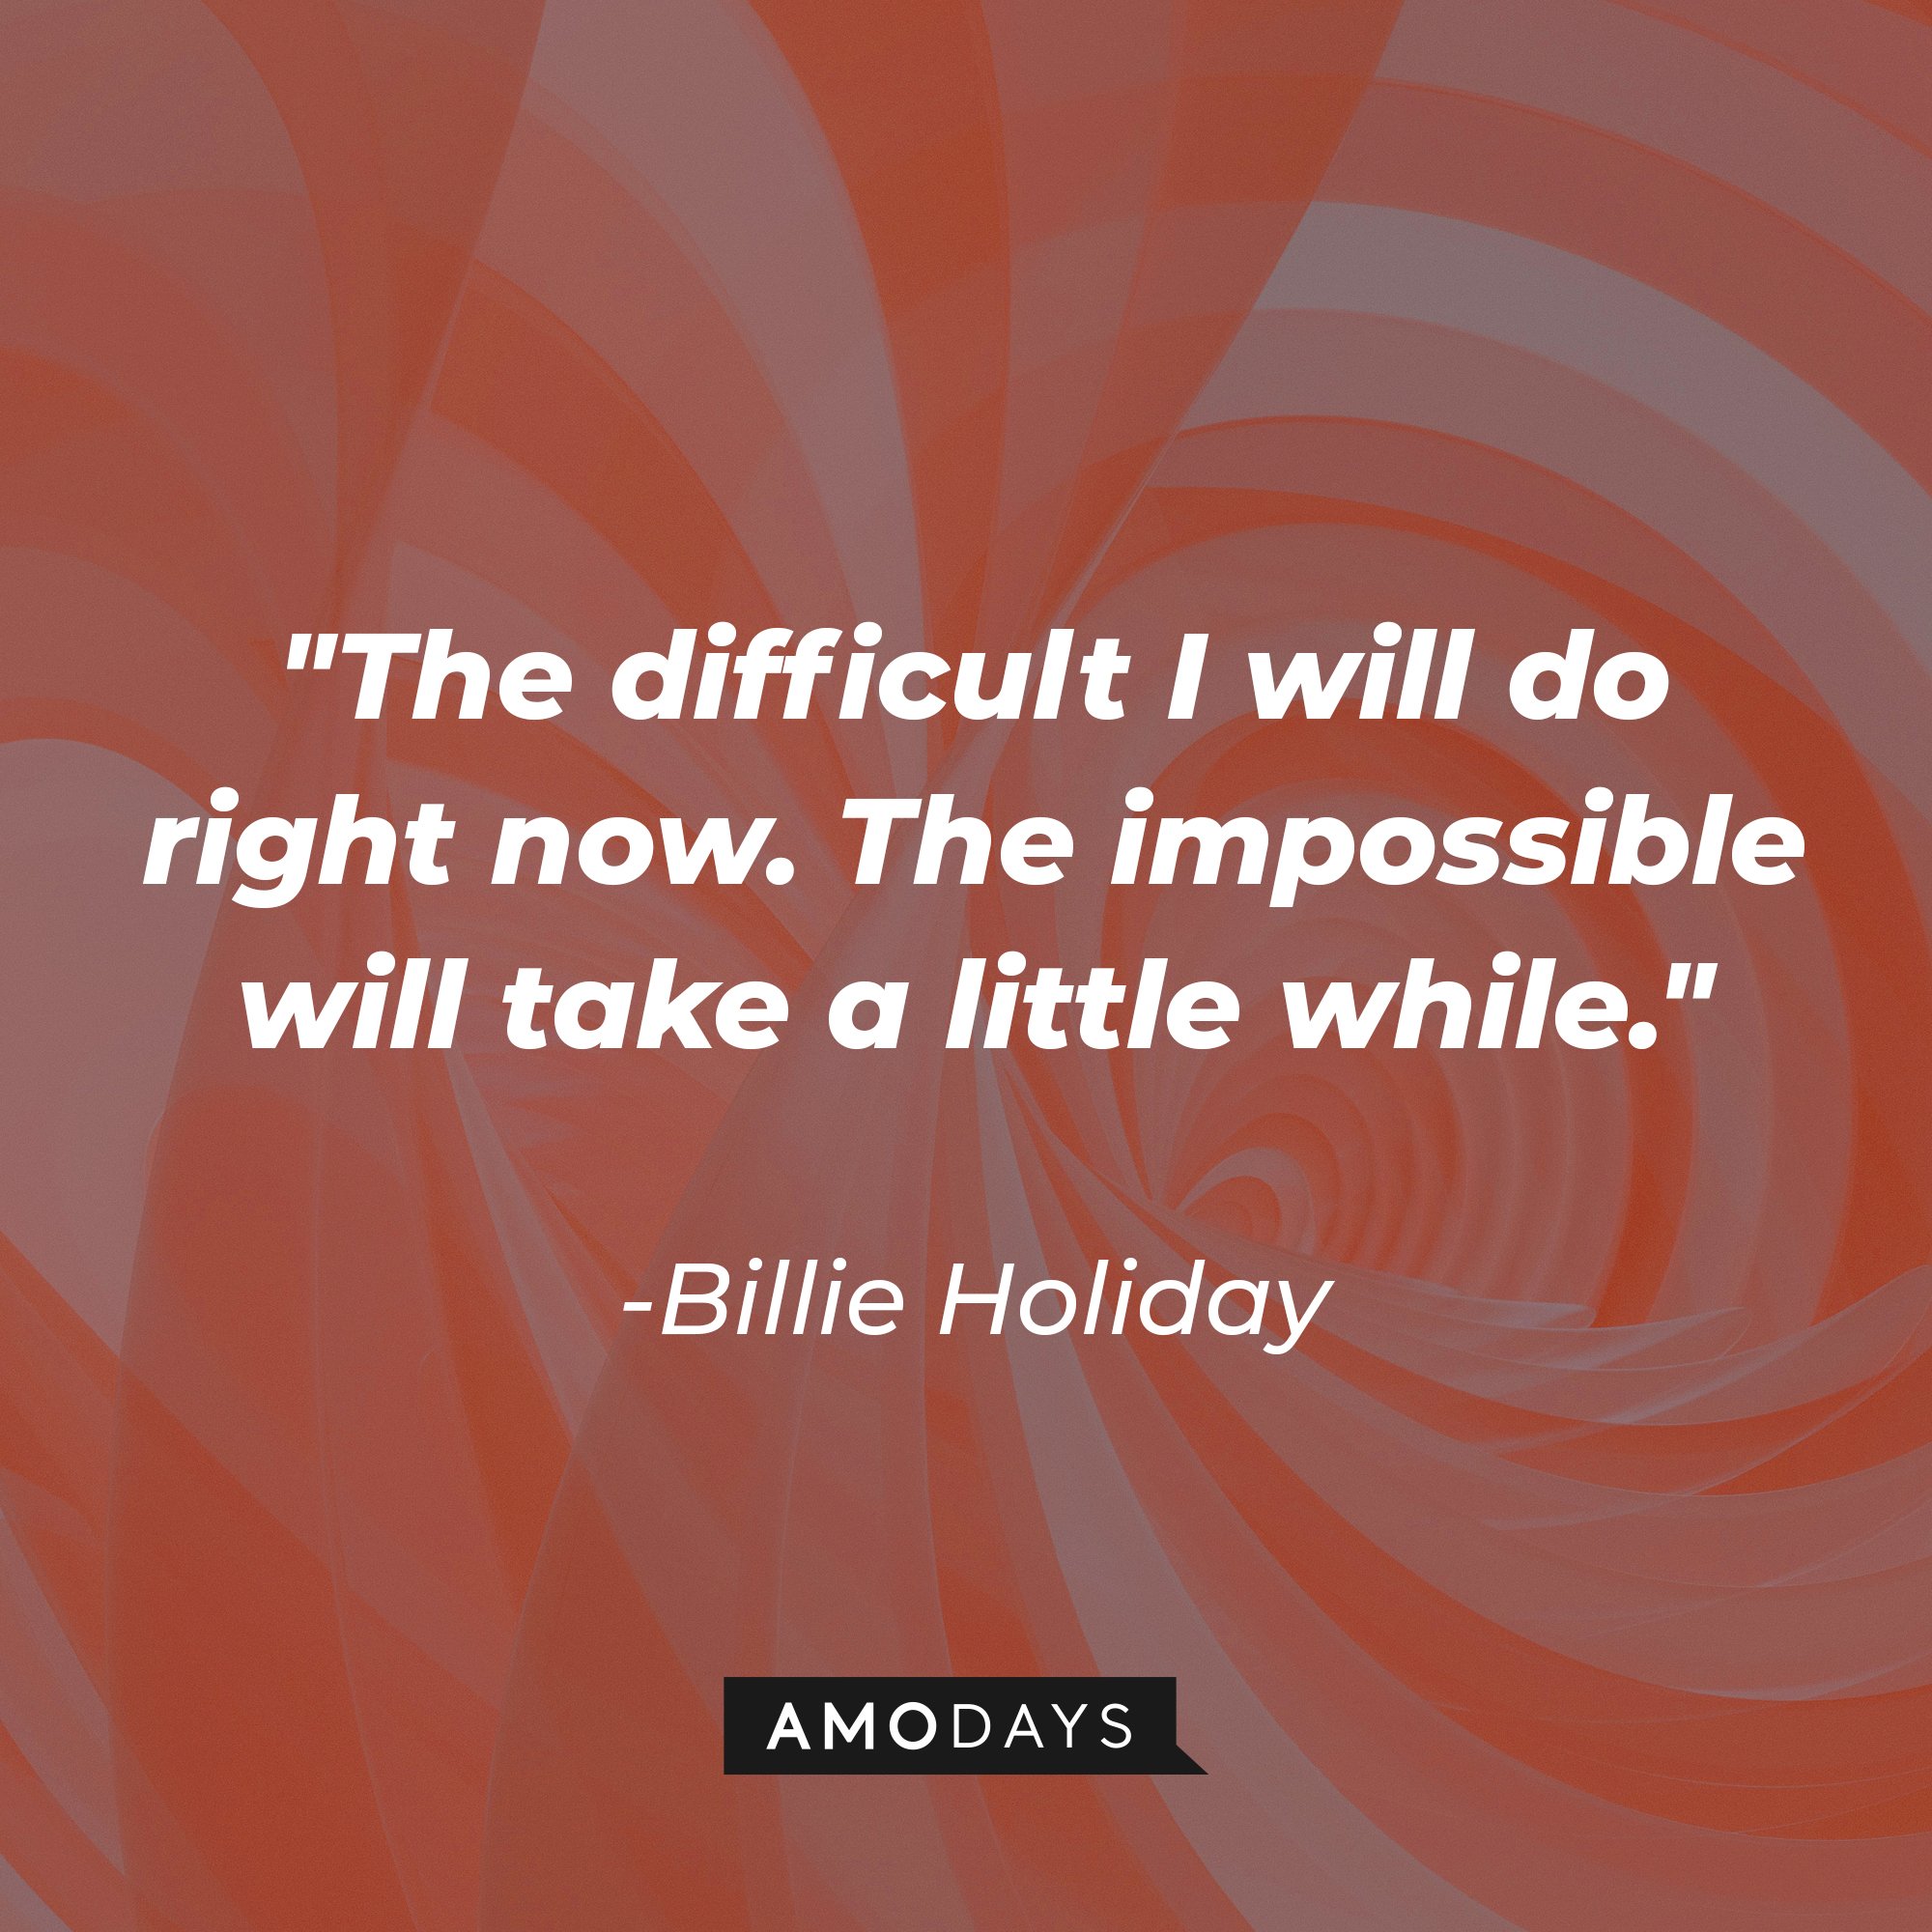 Billie Holiday's quote "The difficult I will do right now. The impossible will take a little while." | Source: Unsplash.com